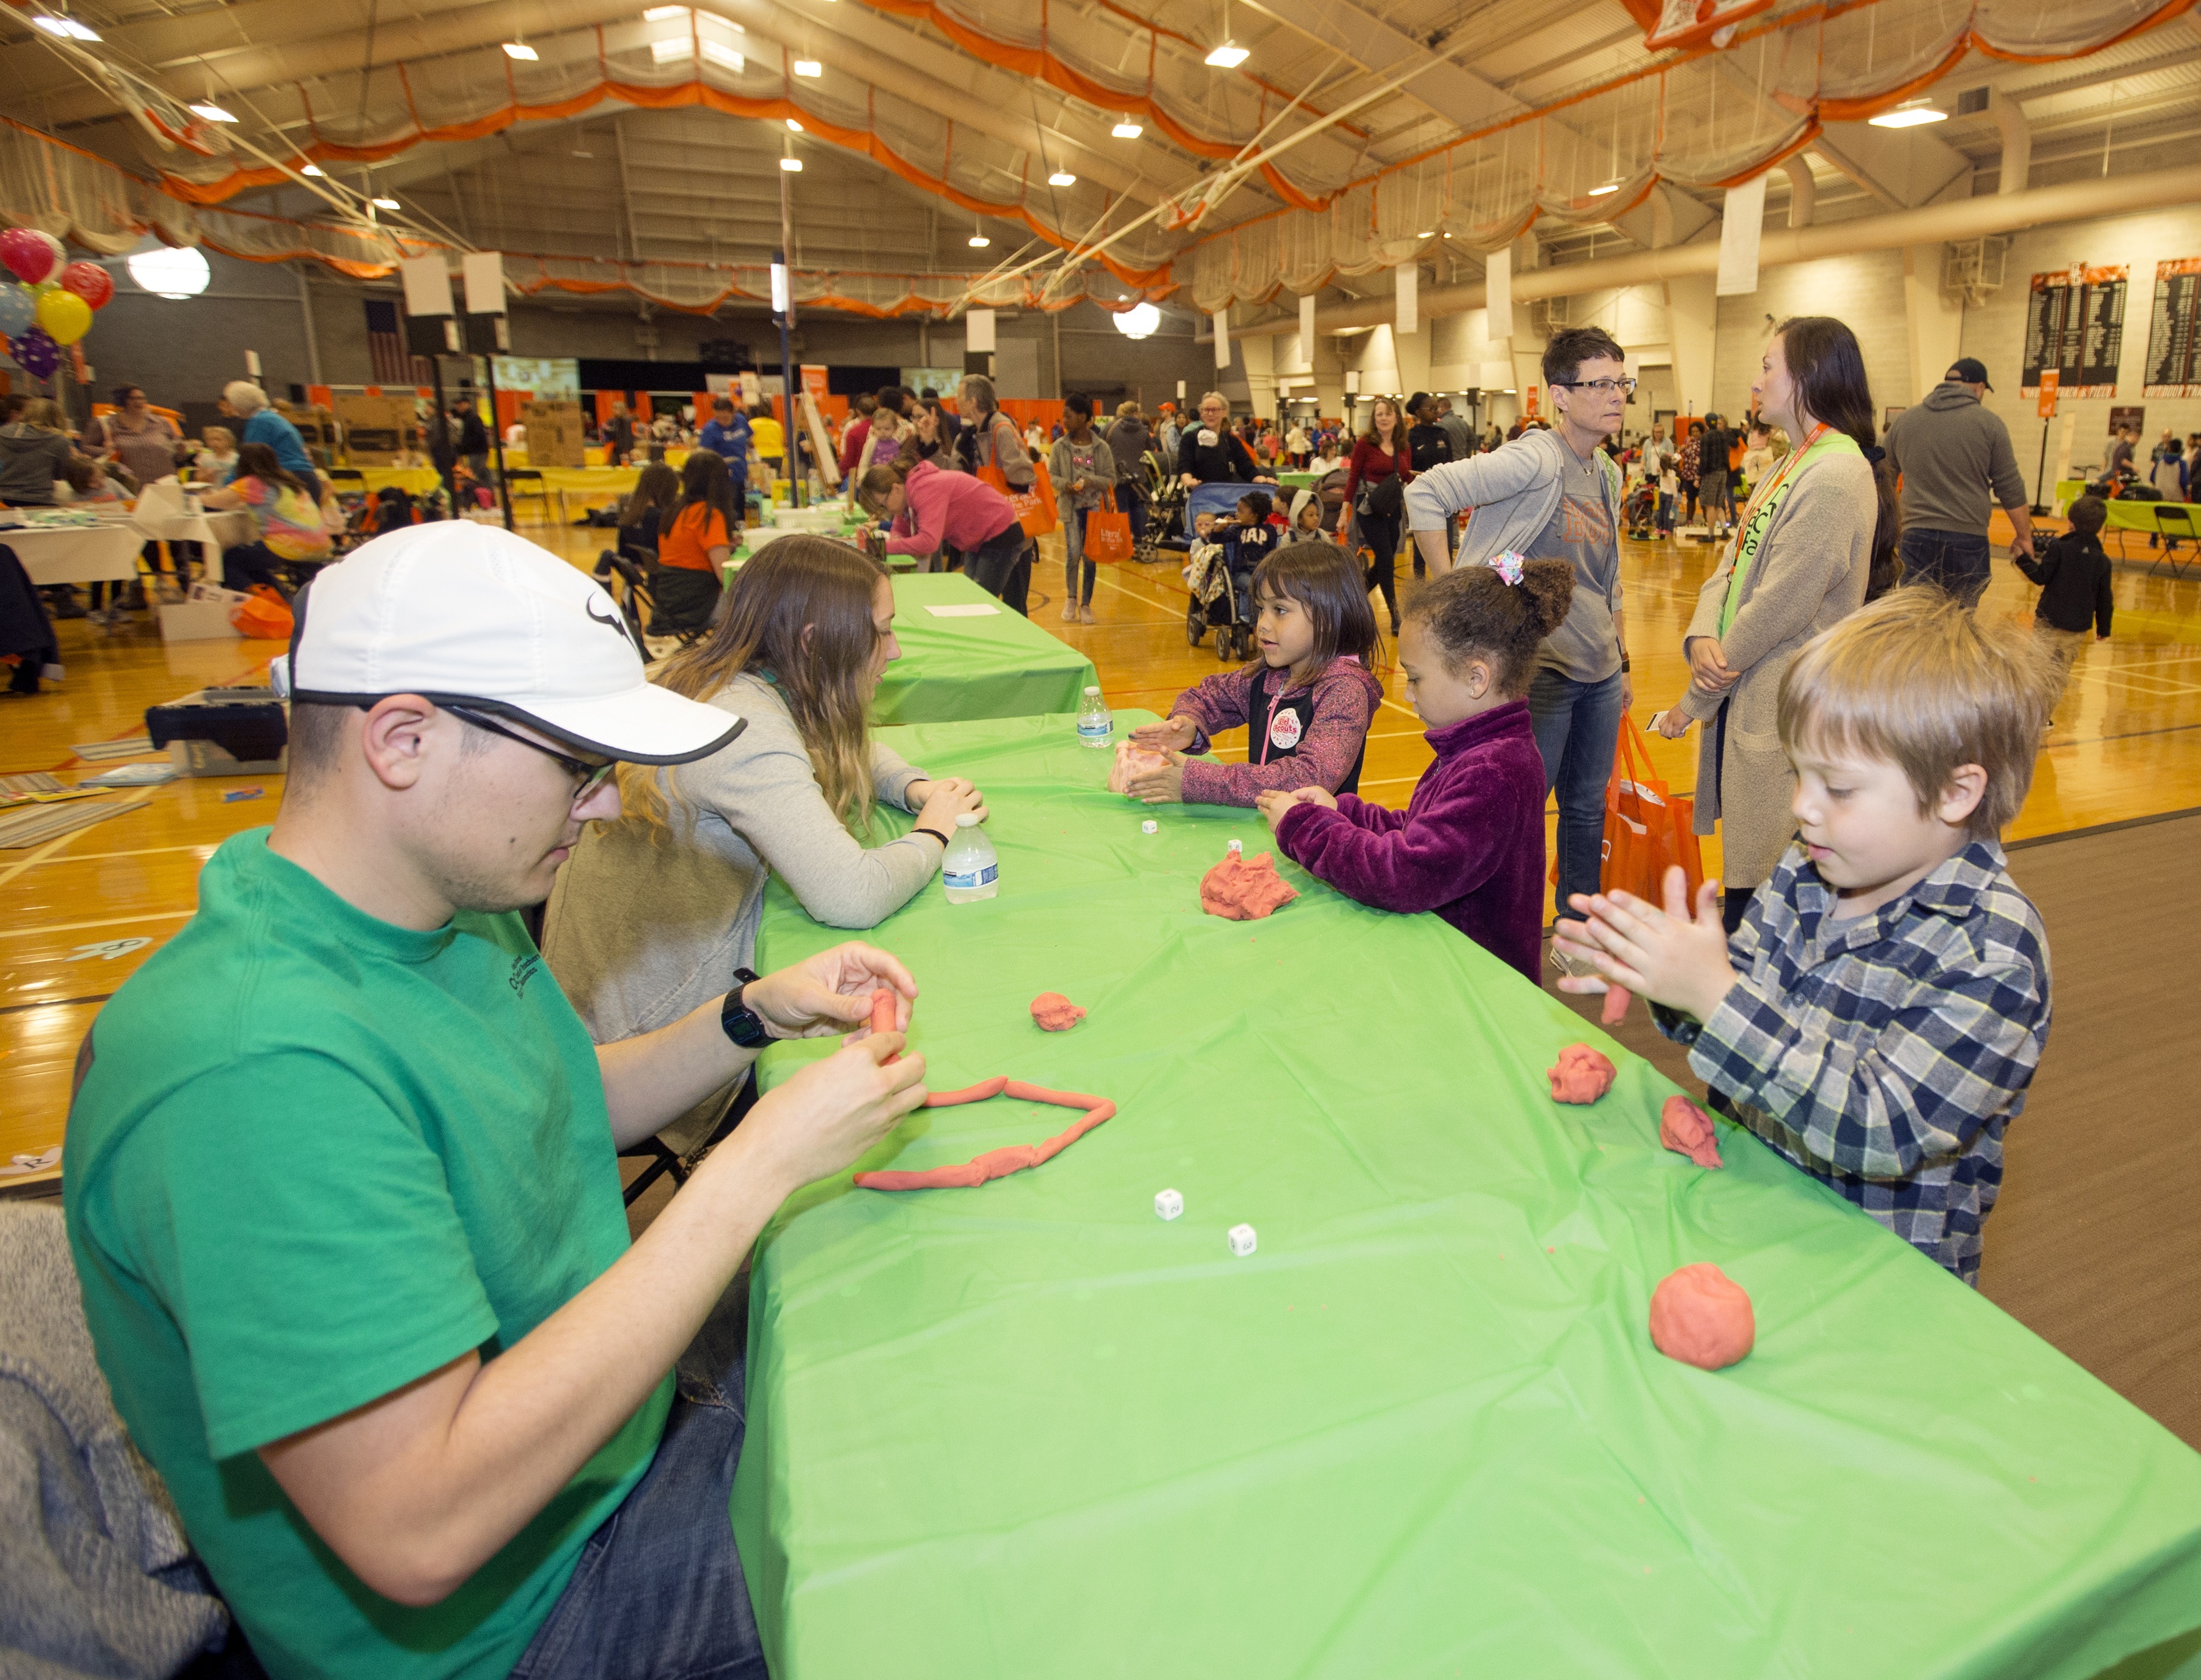 A male art education master’s student from BGSU and a little boy play with clay at a community art education event with many tables, exhibits and other students and children.